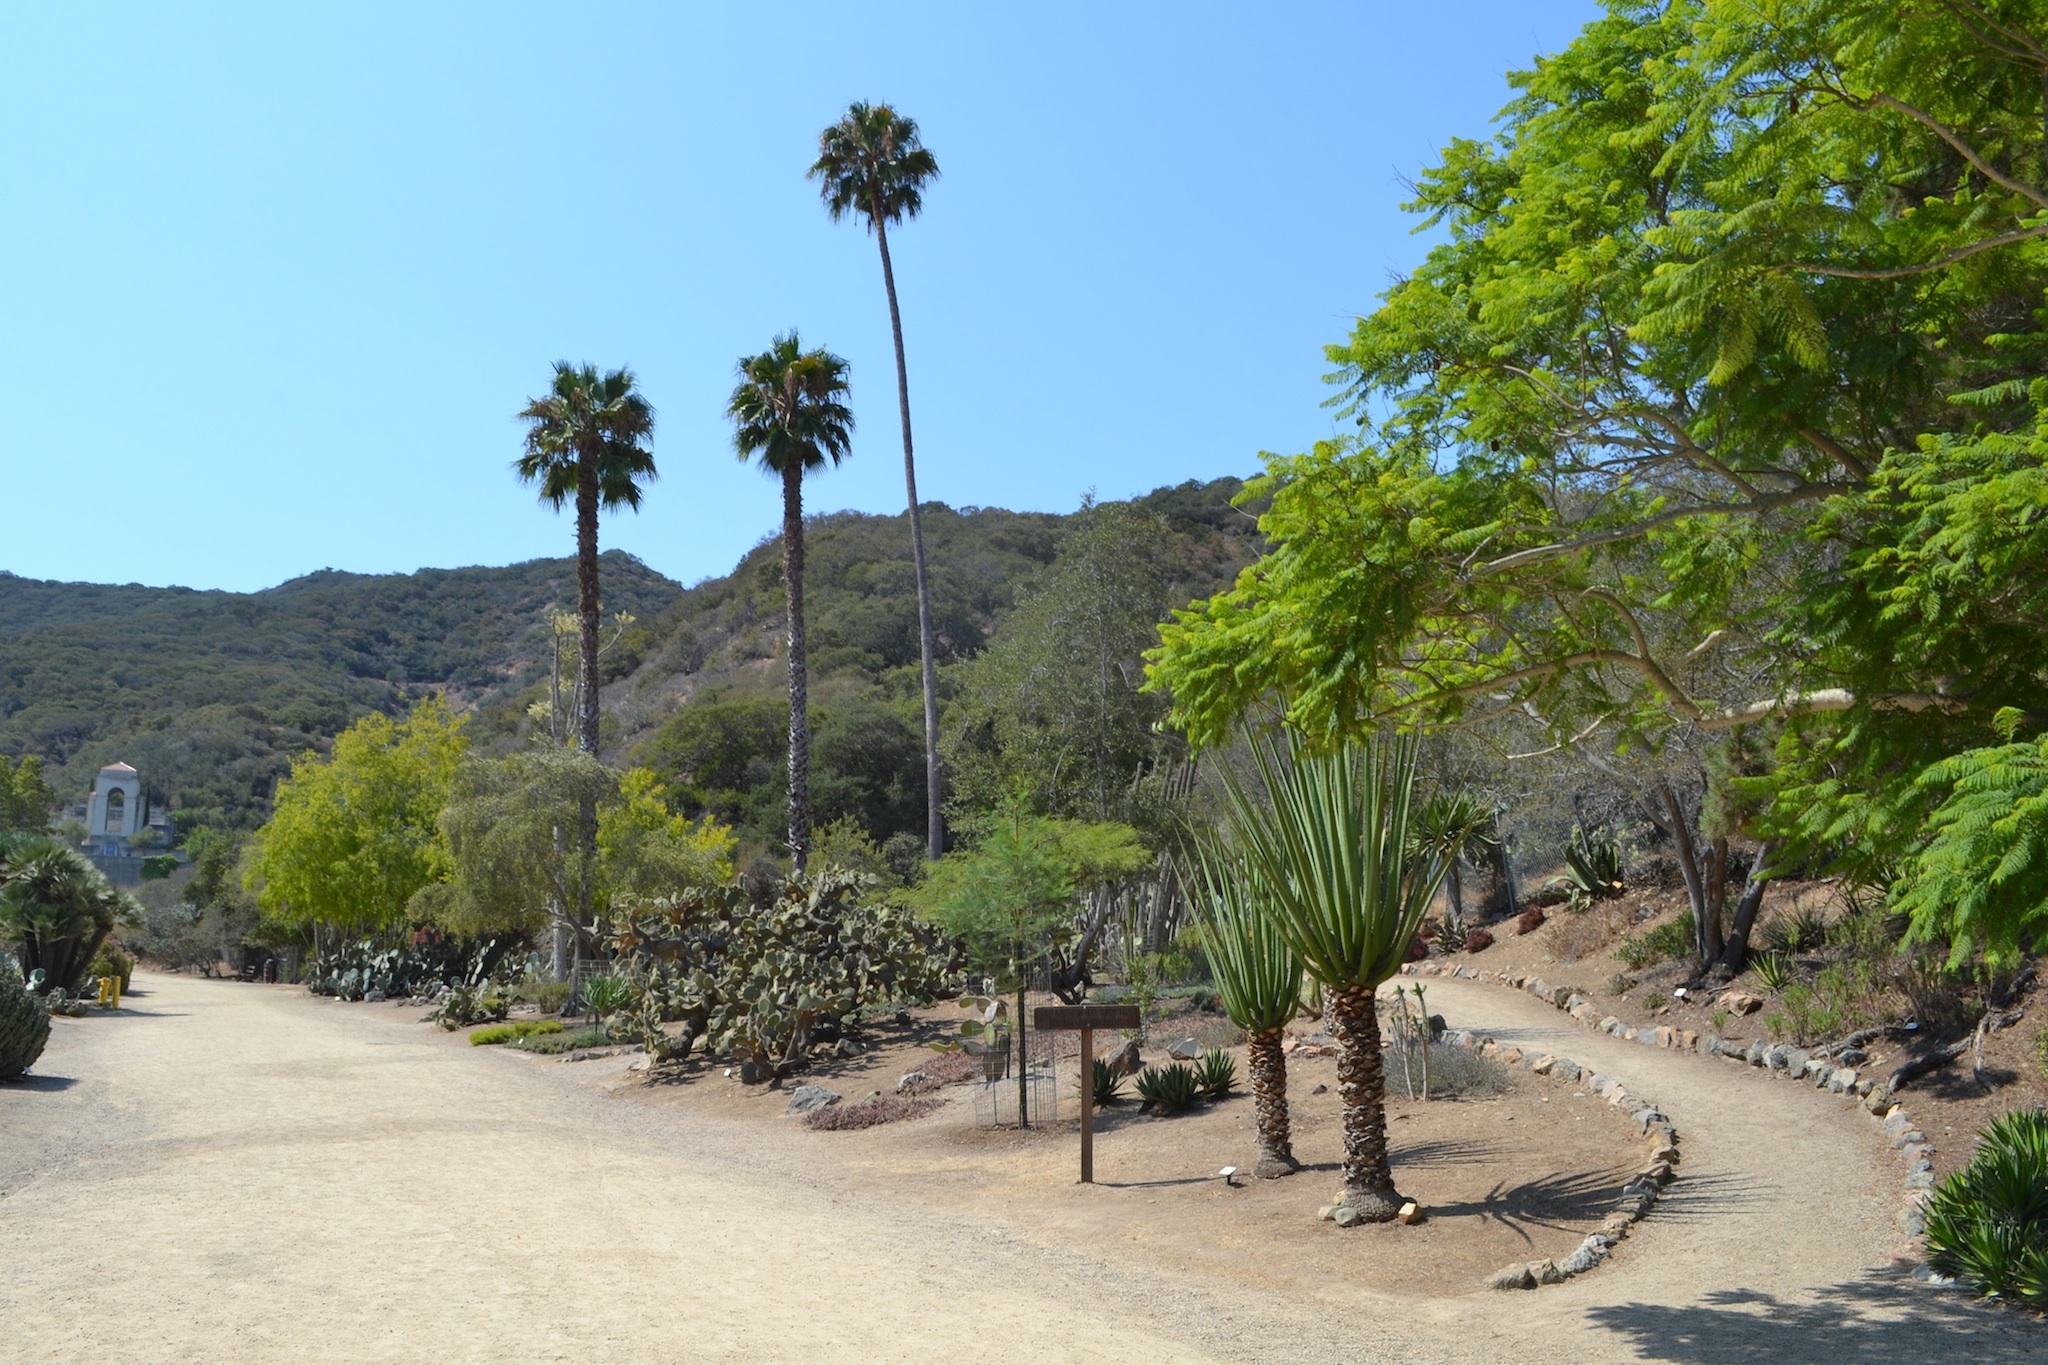 Wrigley Memorial And Botanical Garden Attractions In Catalina